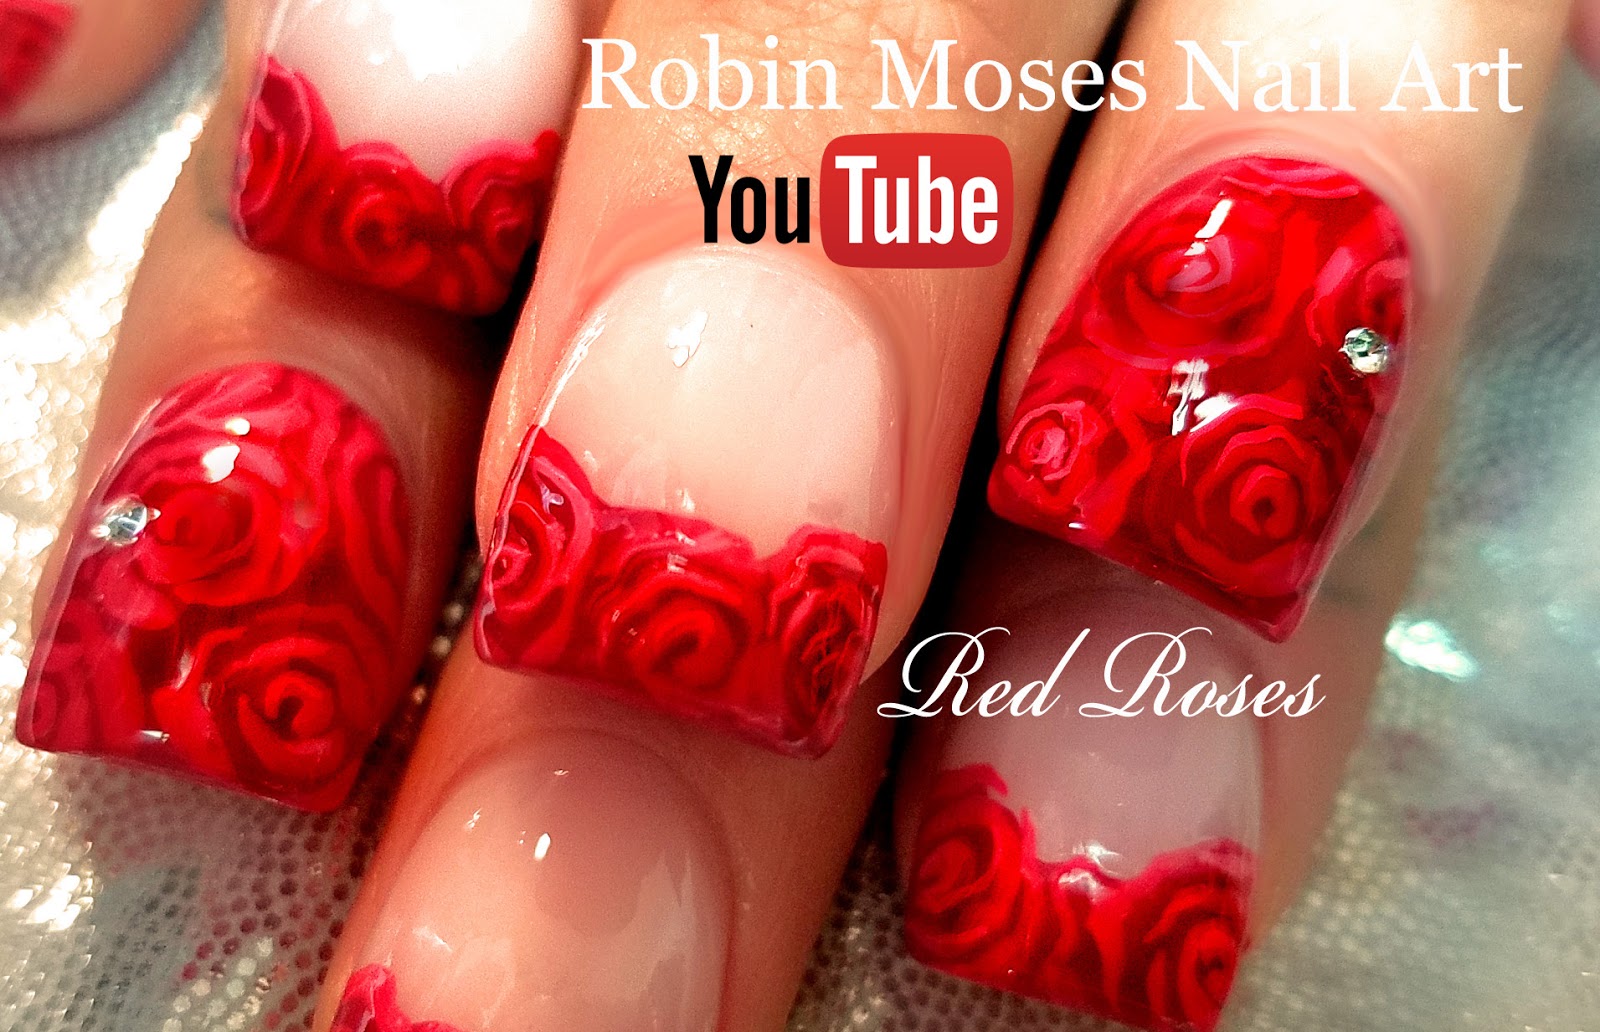 5. Nail Art Tutorial: Colorful Ring Finger Design - wide 3